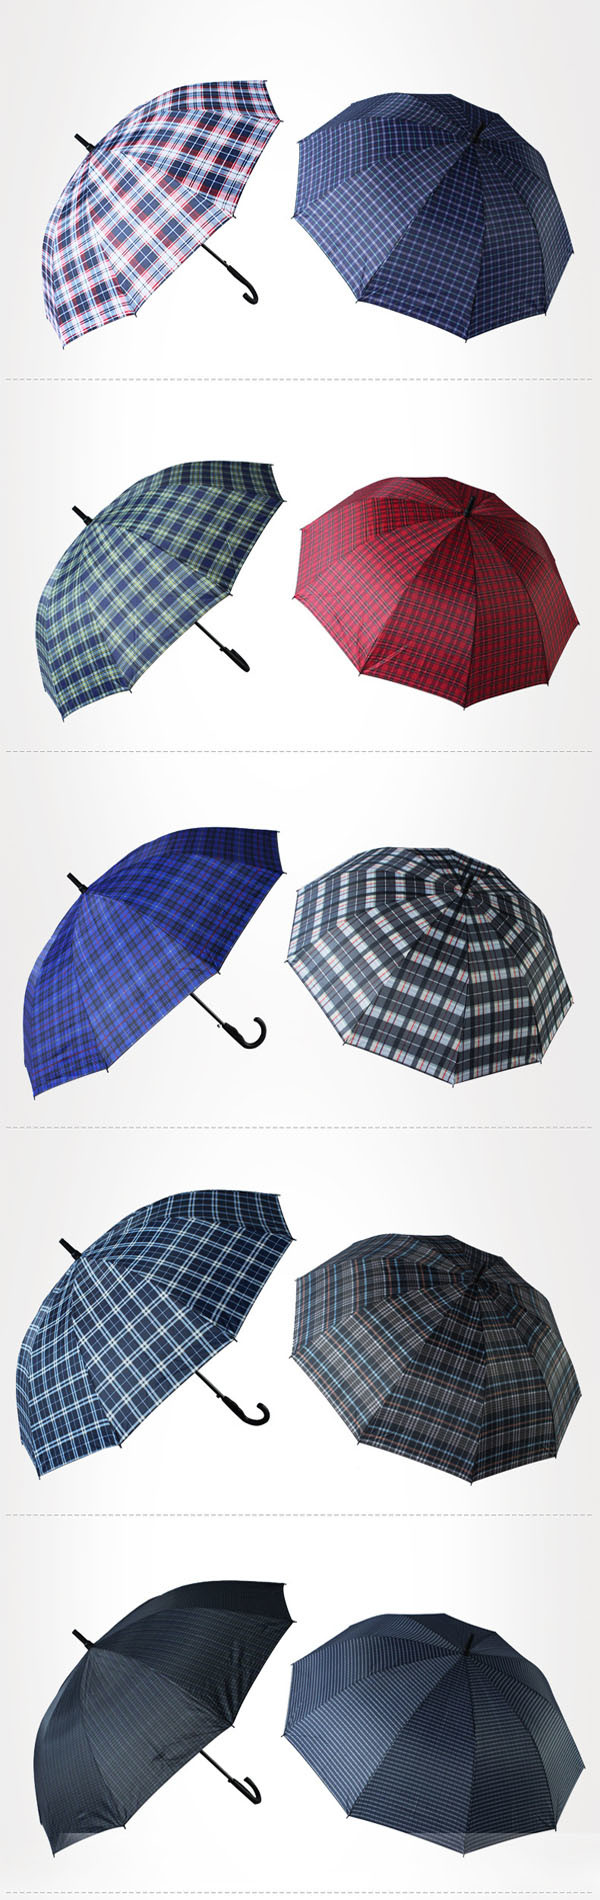 Outdoor Use Promotion Advertising Umbrella